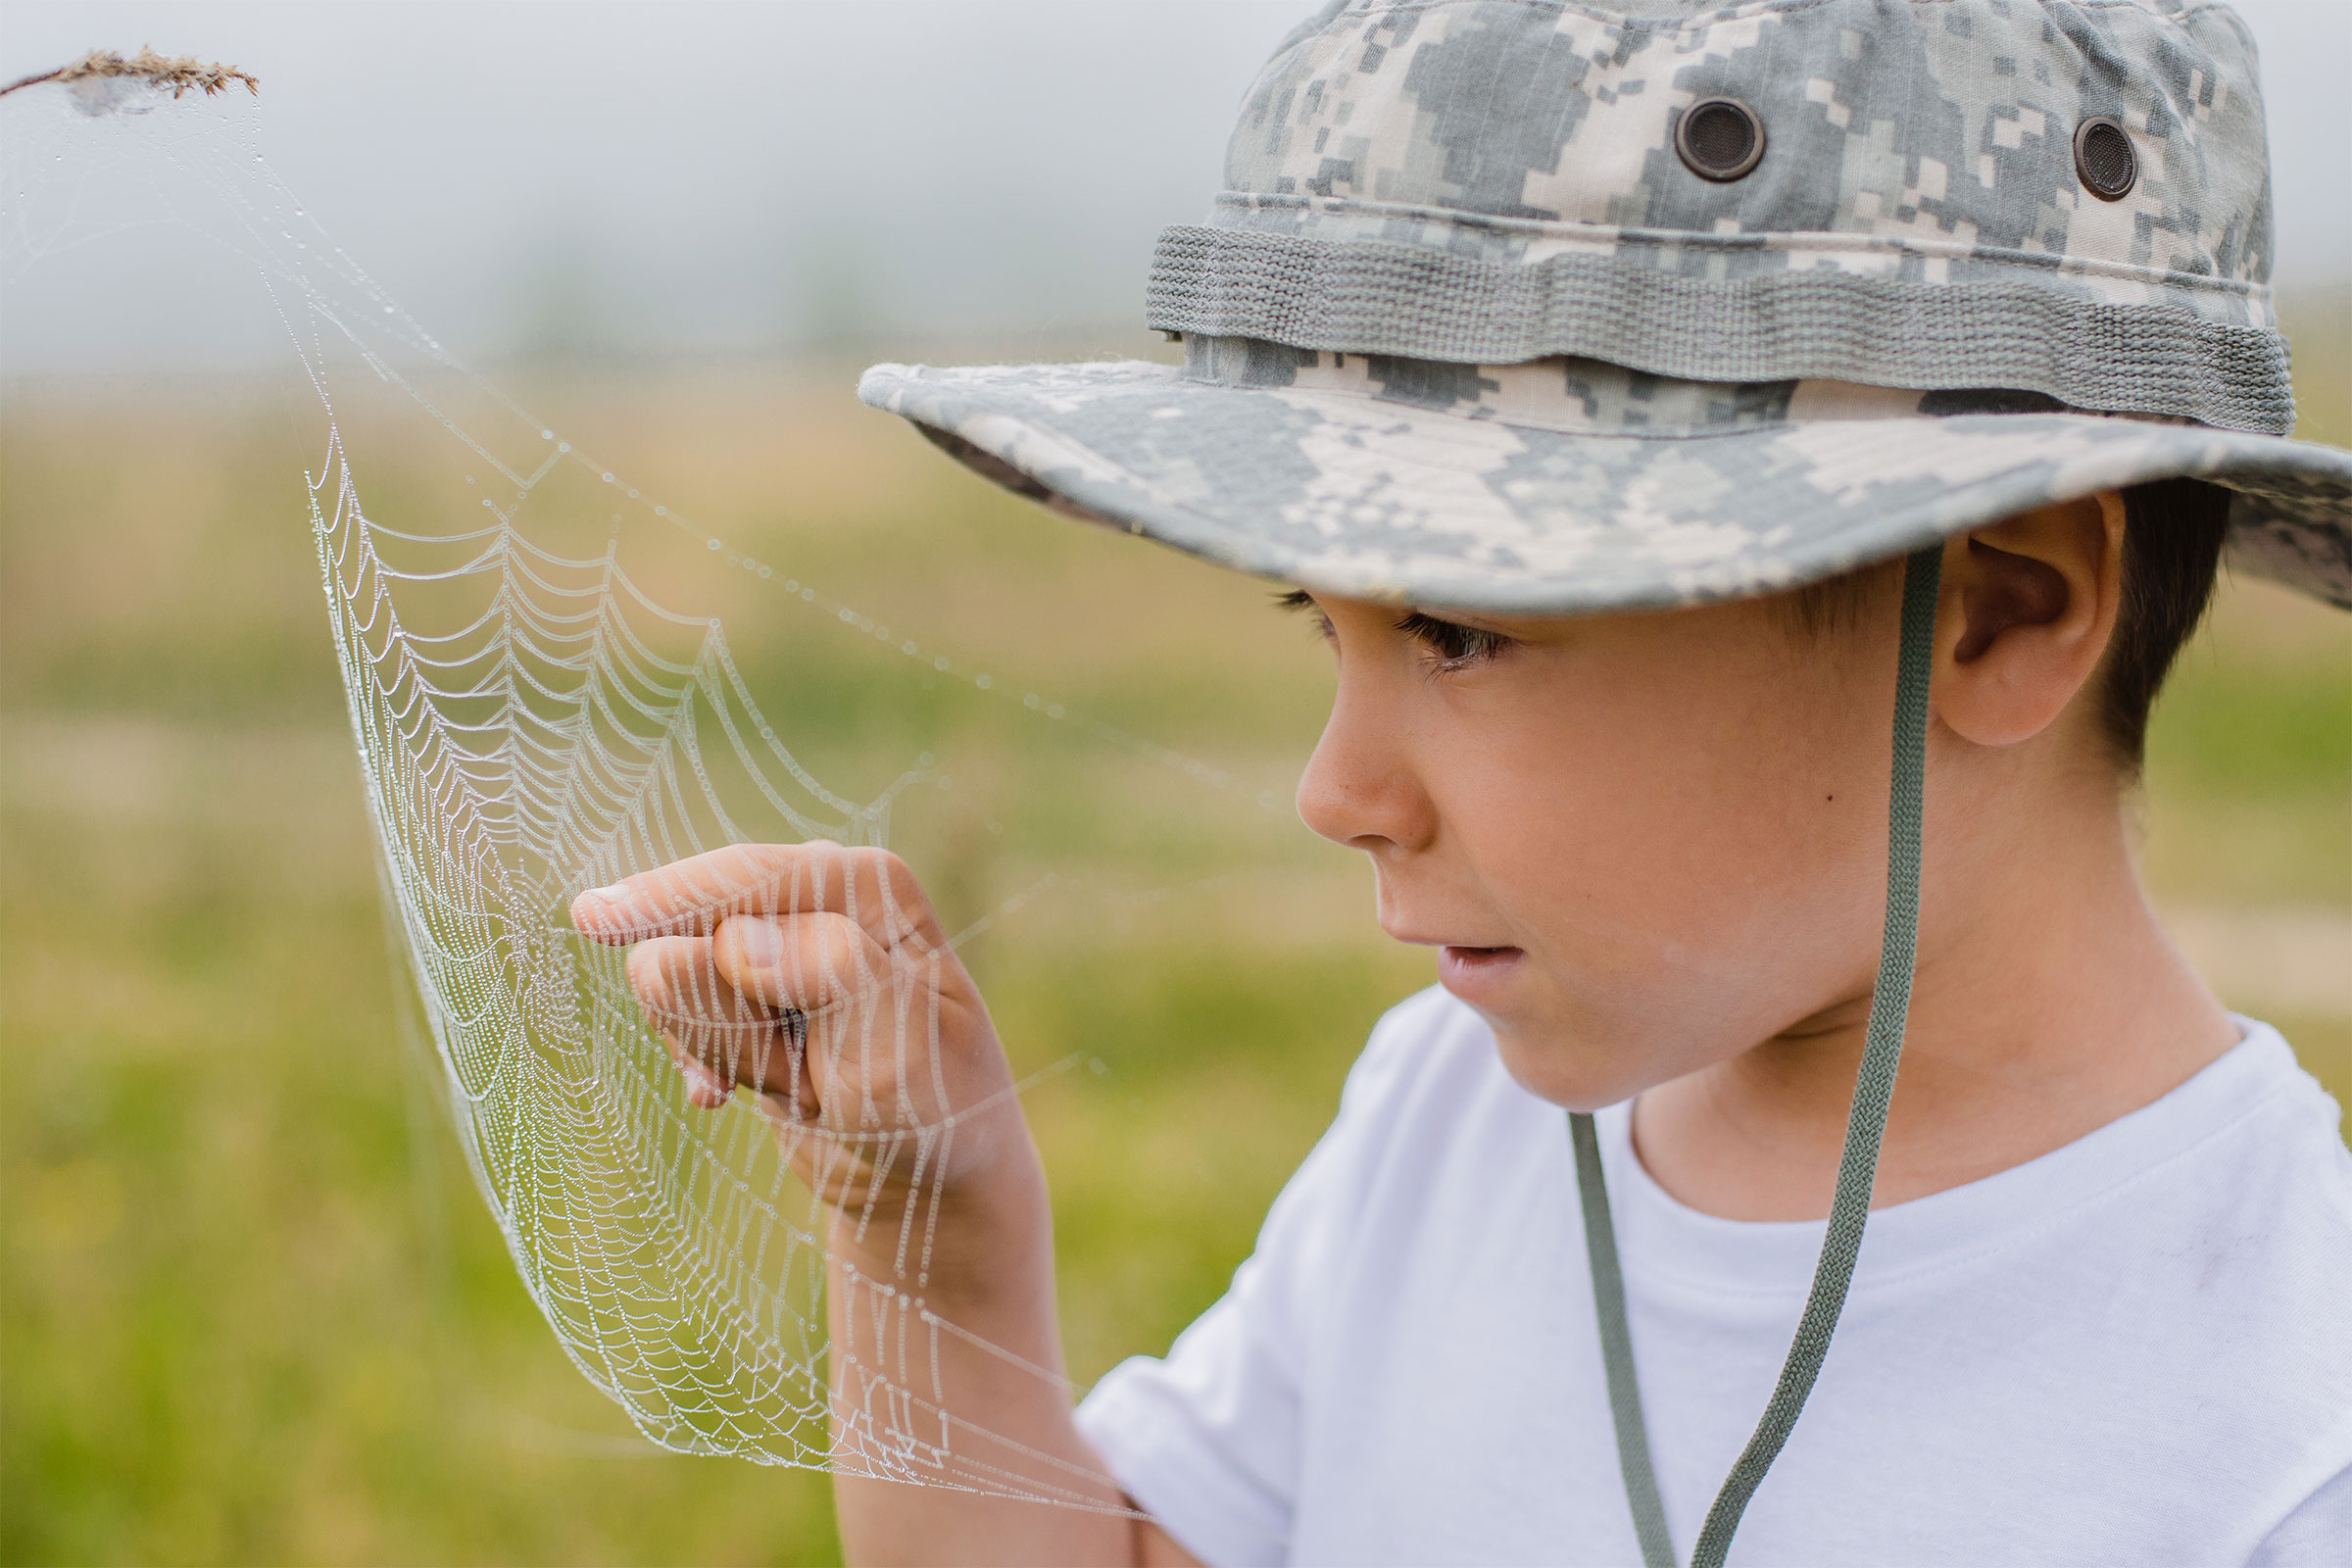 Child looking at spider web